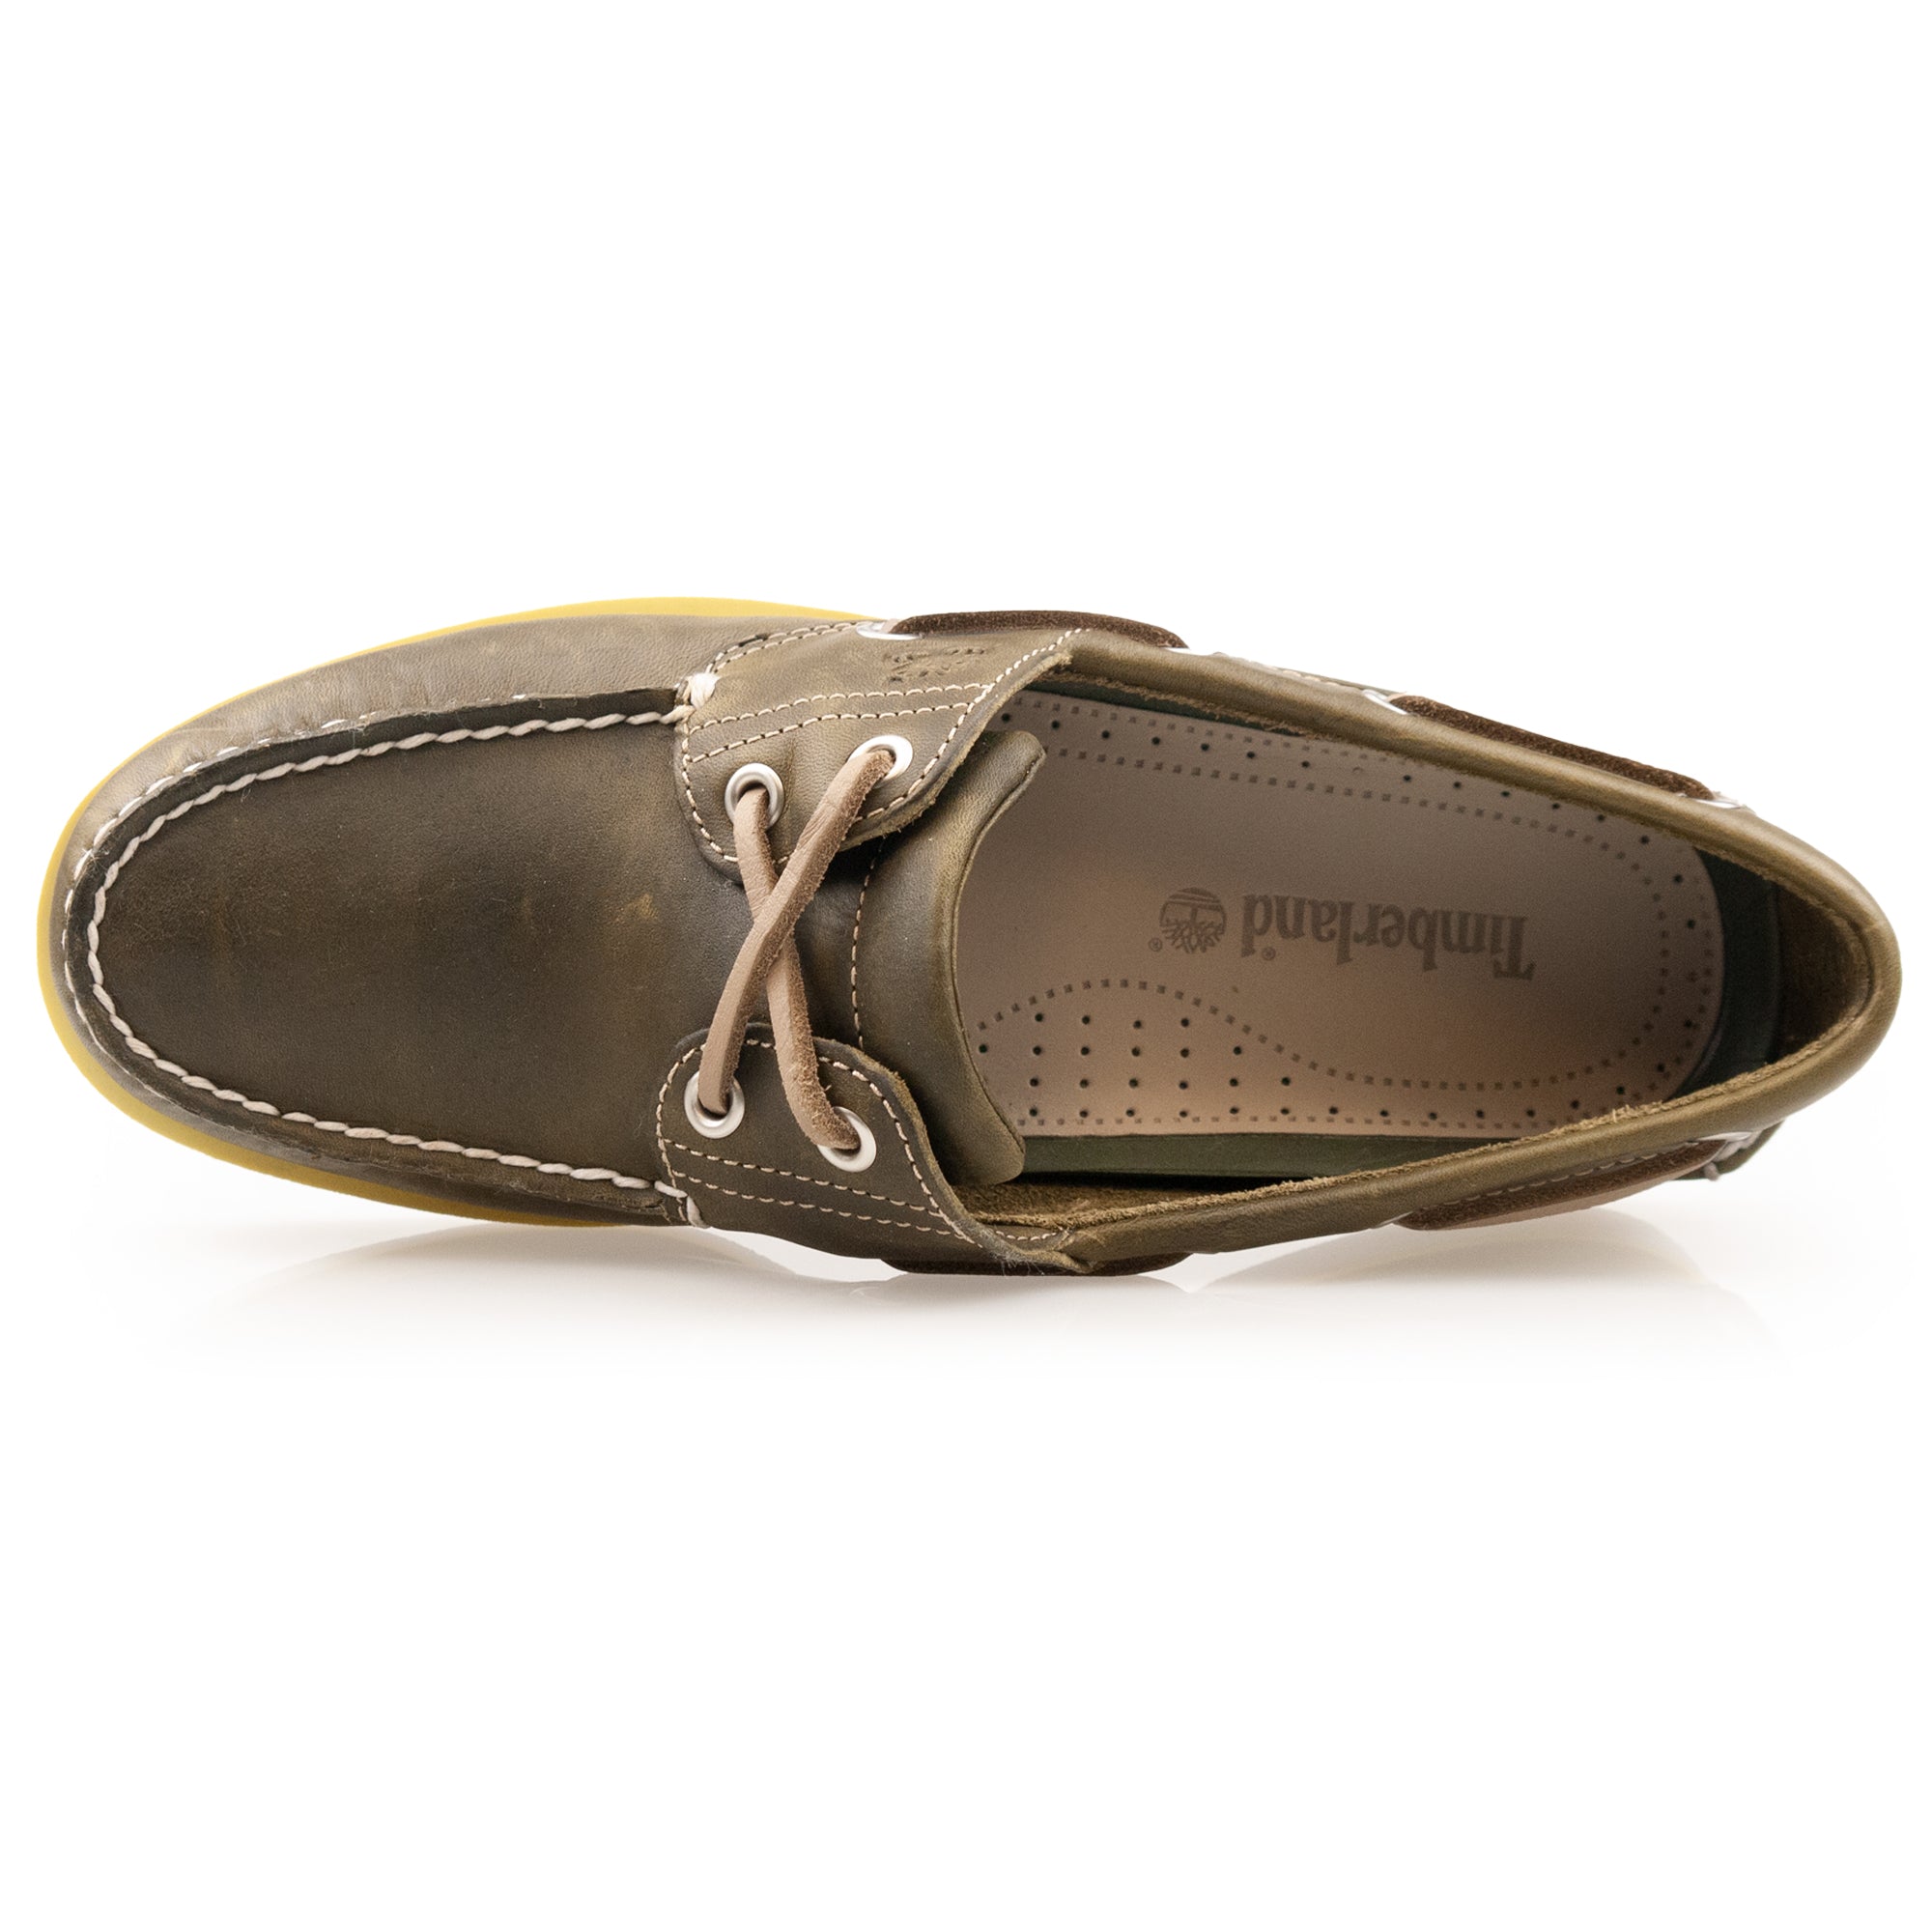 Timberland Classic Boat Shoe - A418H Olive Full Grain